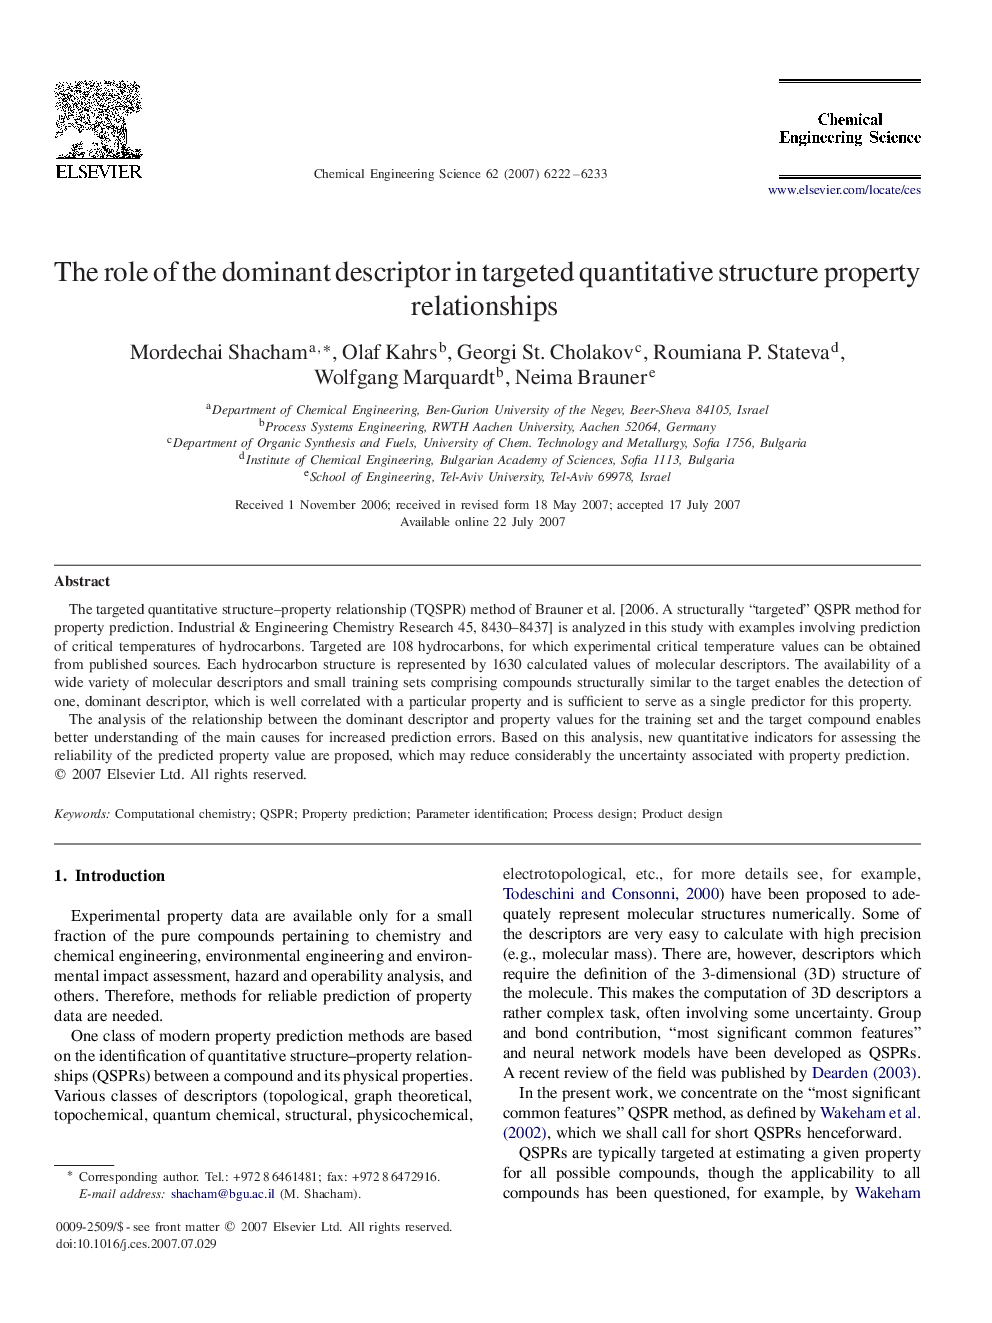 The role of the dominant descriptor in targeted quantitative structure property relationships